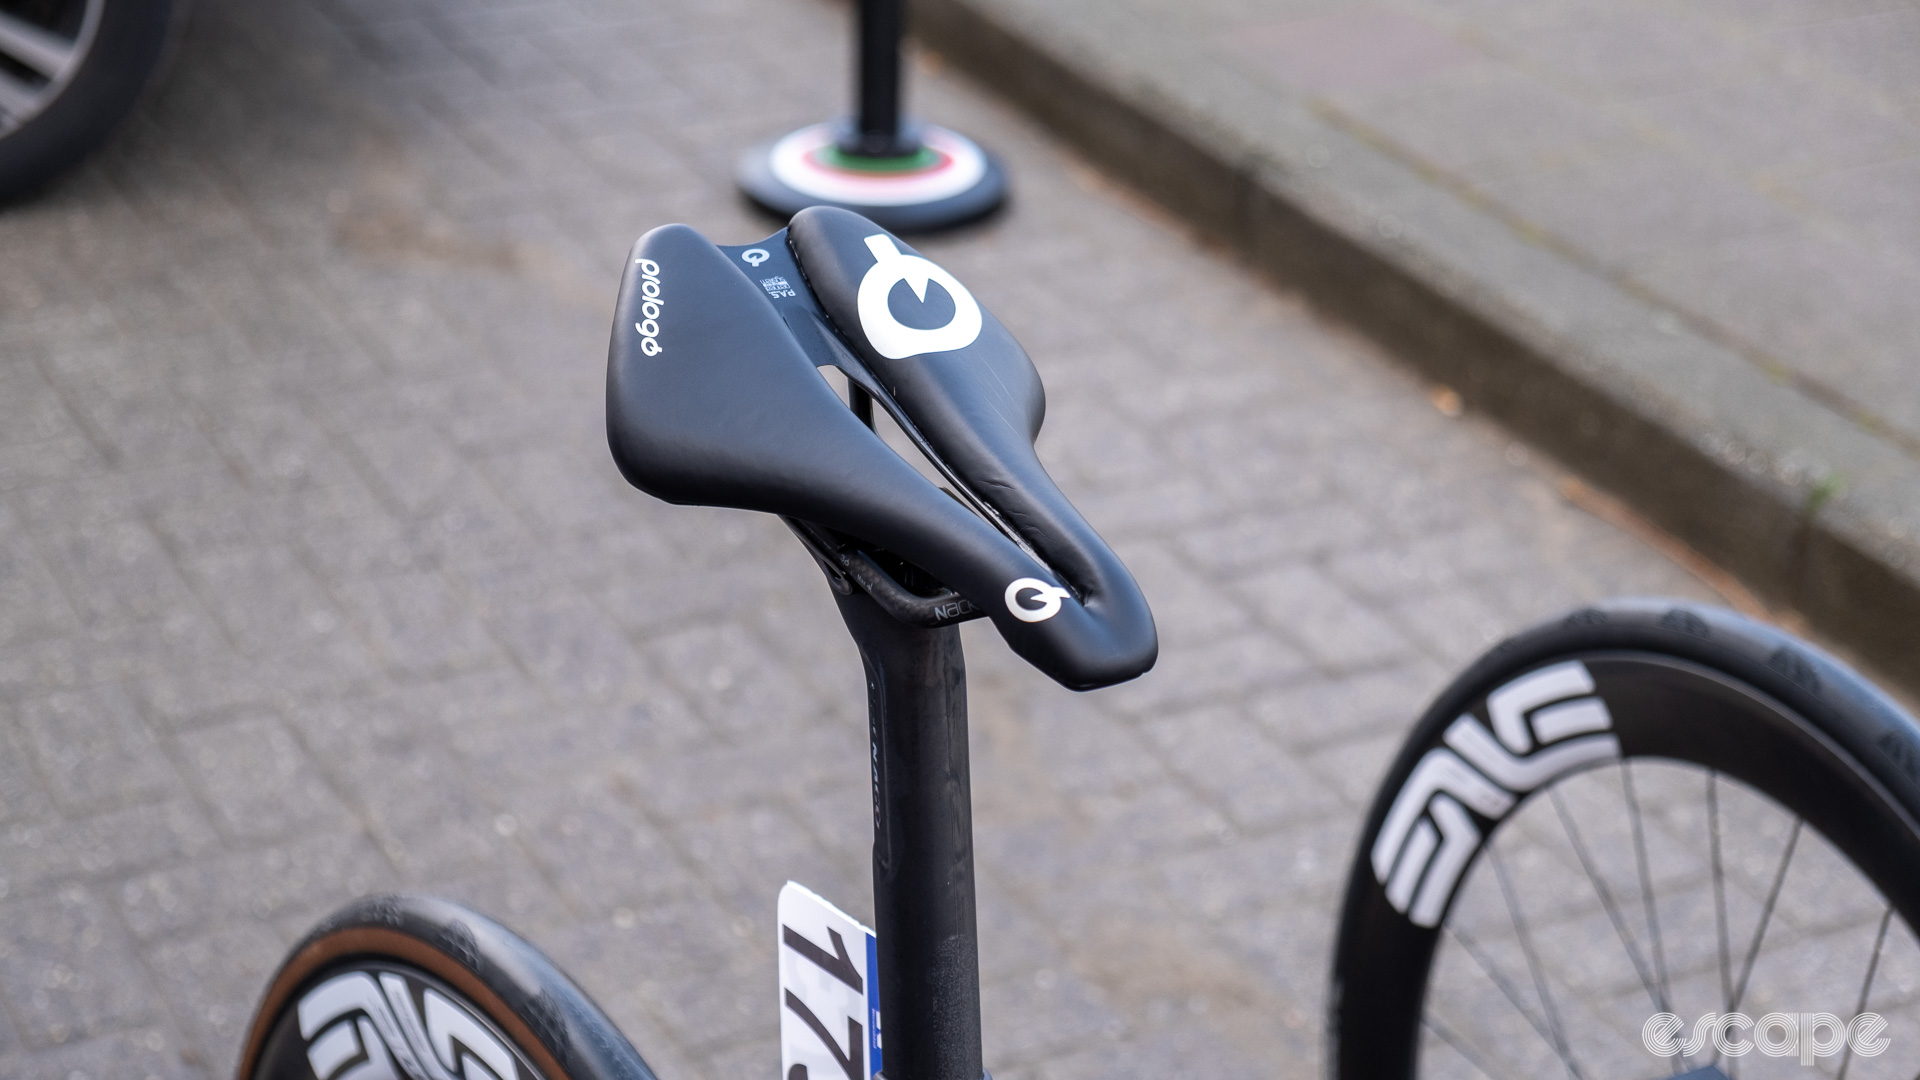 The image shows Mikkel Bjerg's saddle which appears to have additional padding.